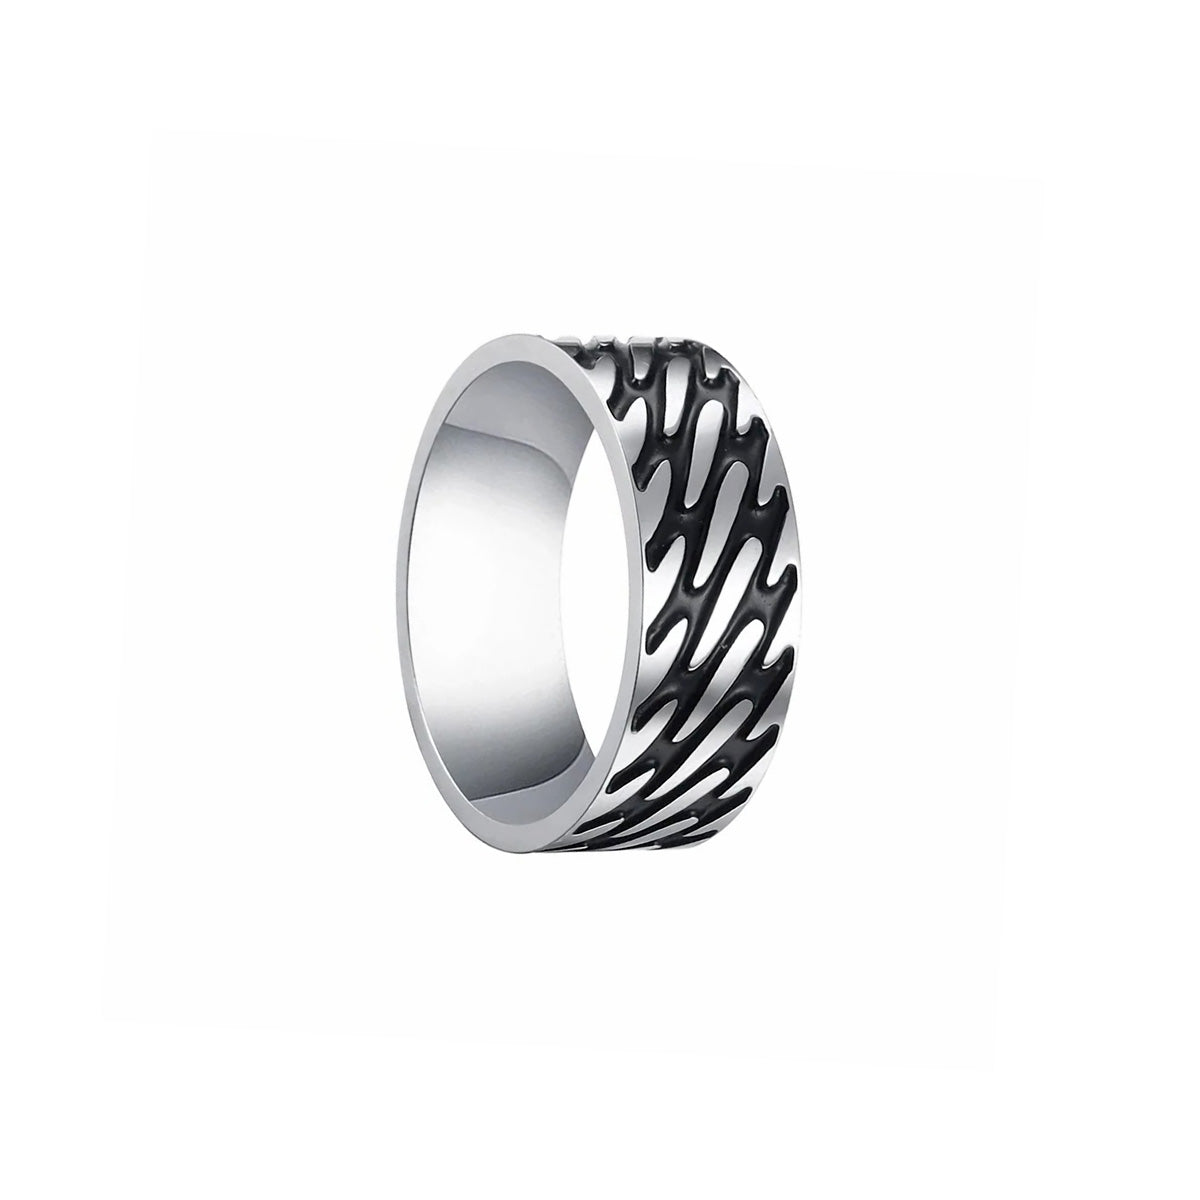 Striped pattern polished steel ring 8mm